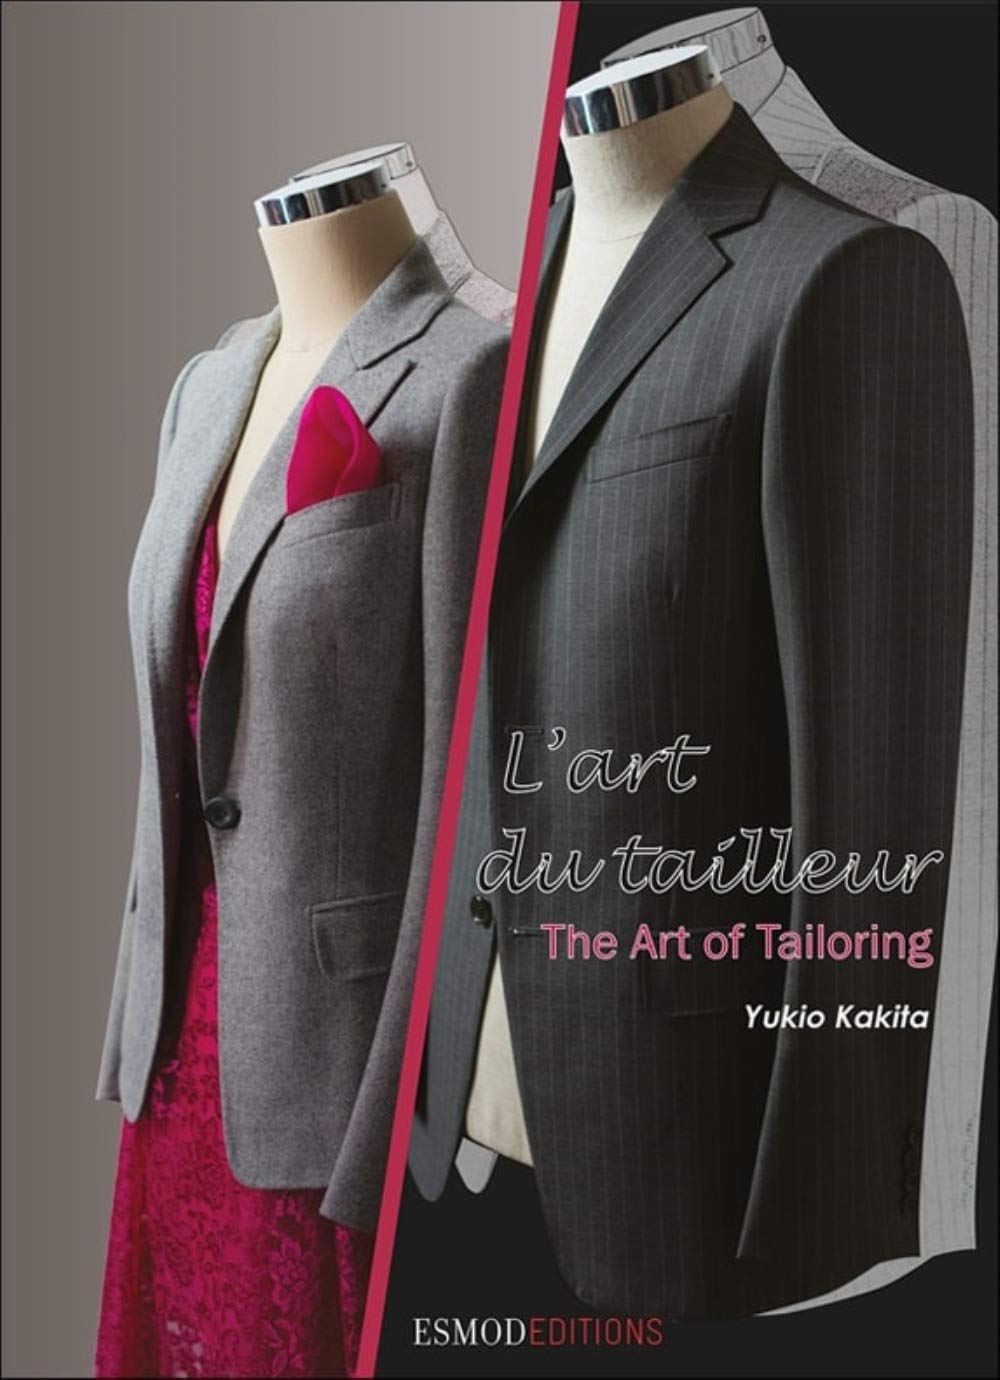 The Art of Tailoring / L'art du tailleur (The Fashion Design Process) (English and French Edition)